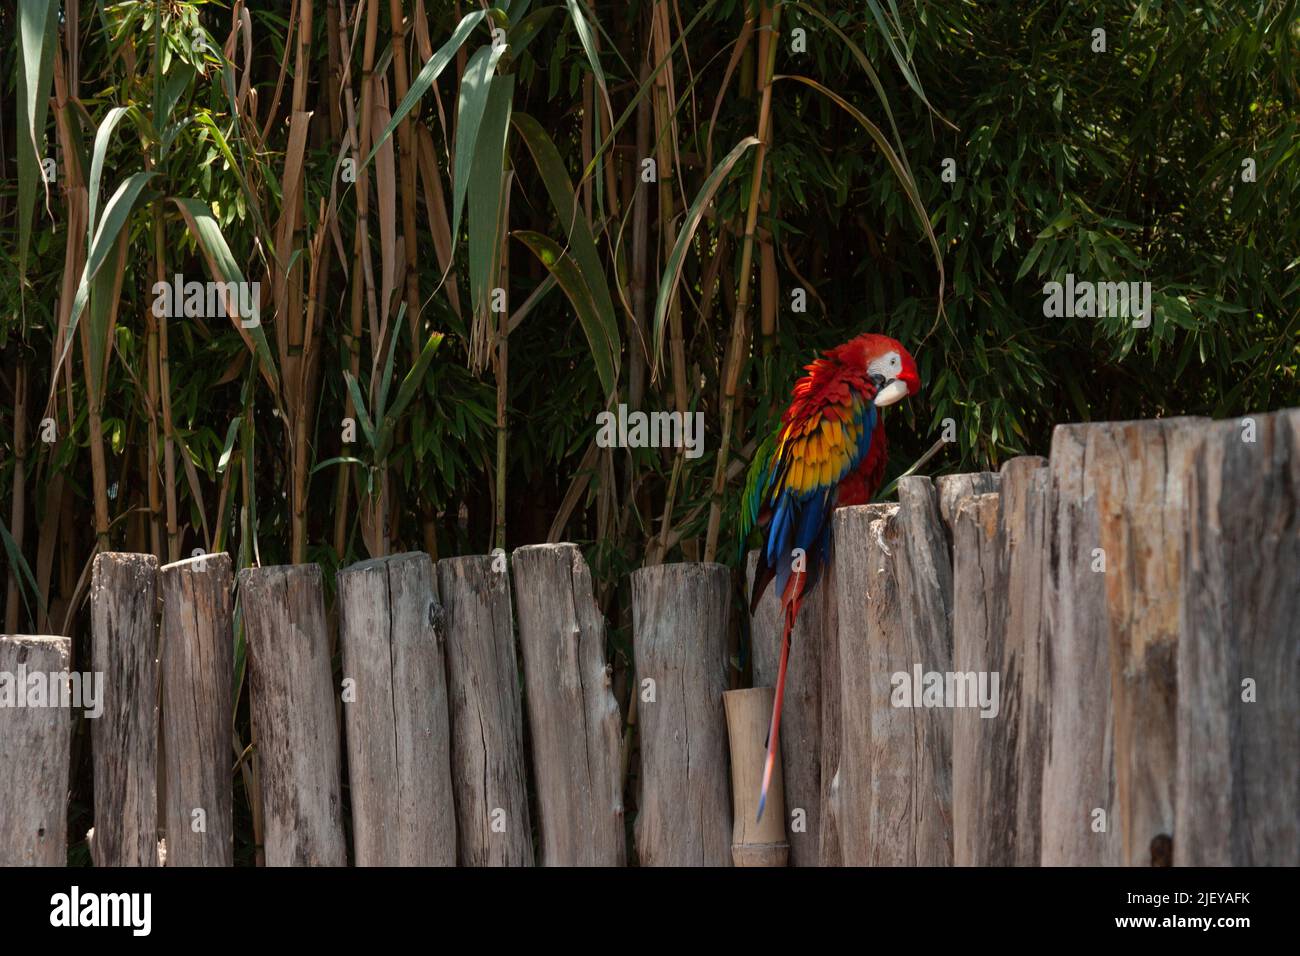 Scarlet macaw: scientific name ara macao is distinguished by its scarlet red head combined with green and blue feathers standing on trunks preening Stock Photo